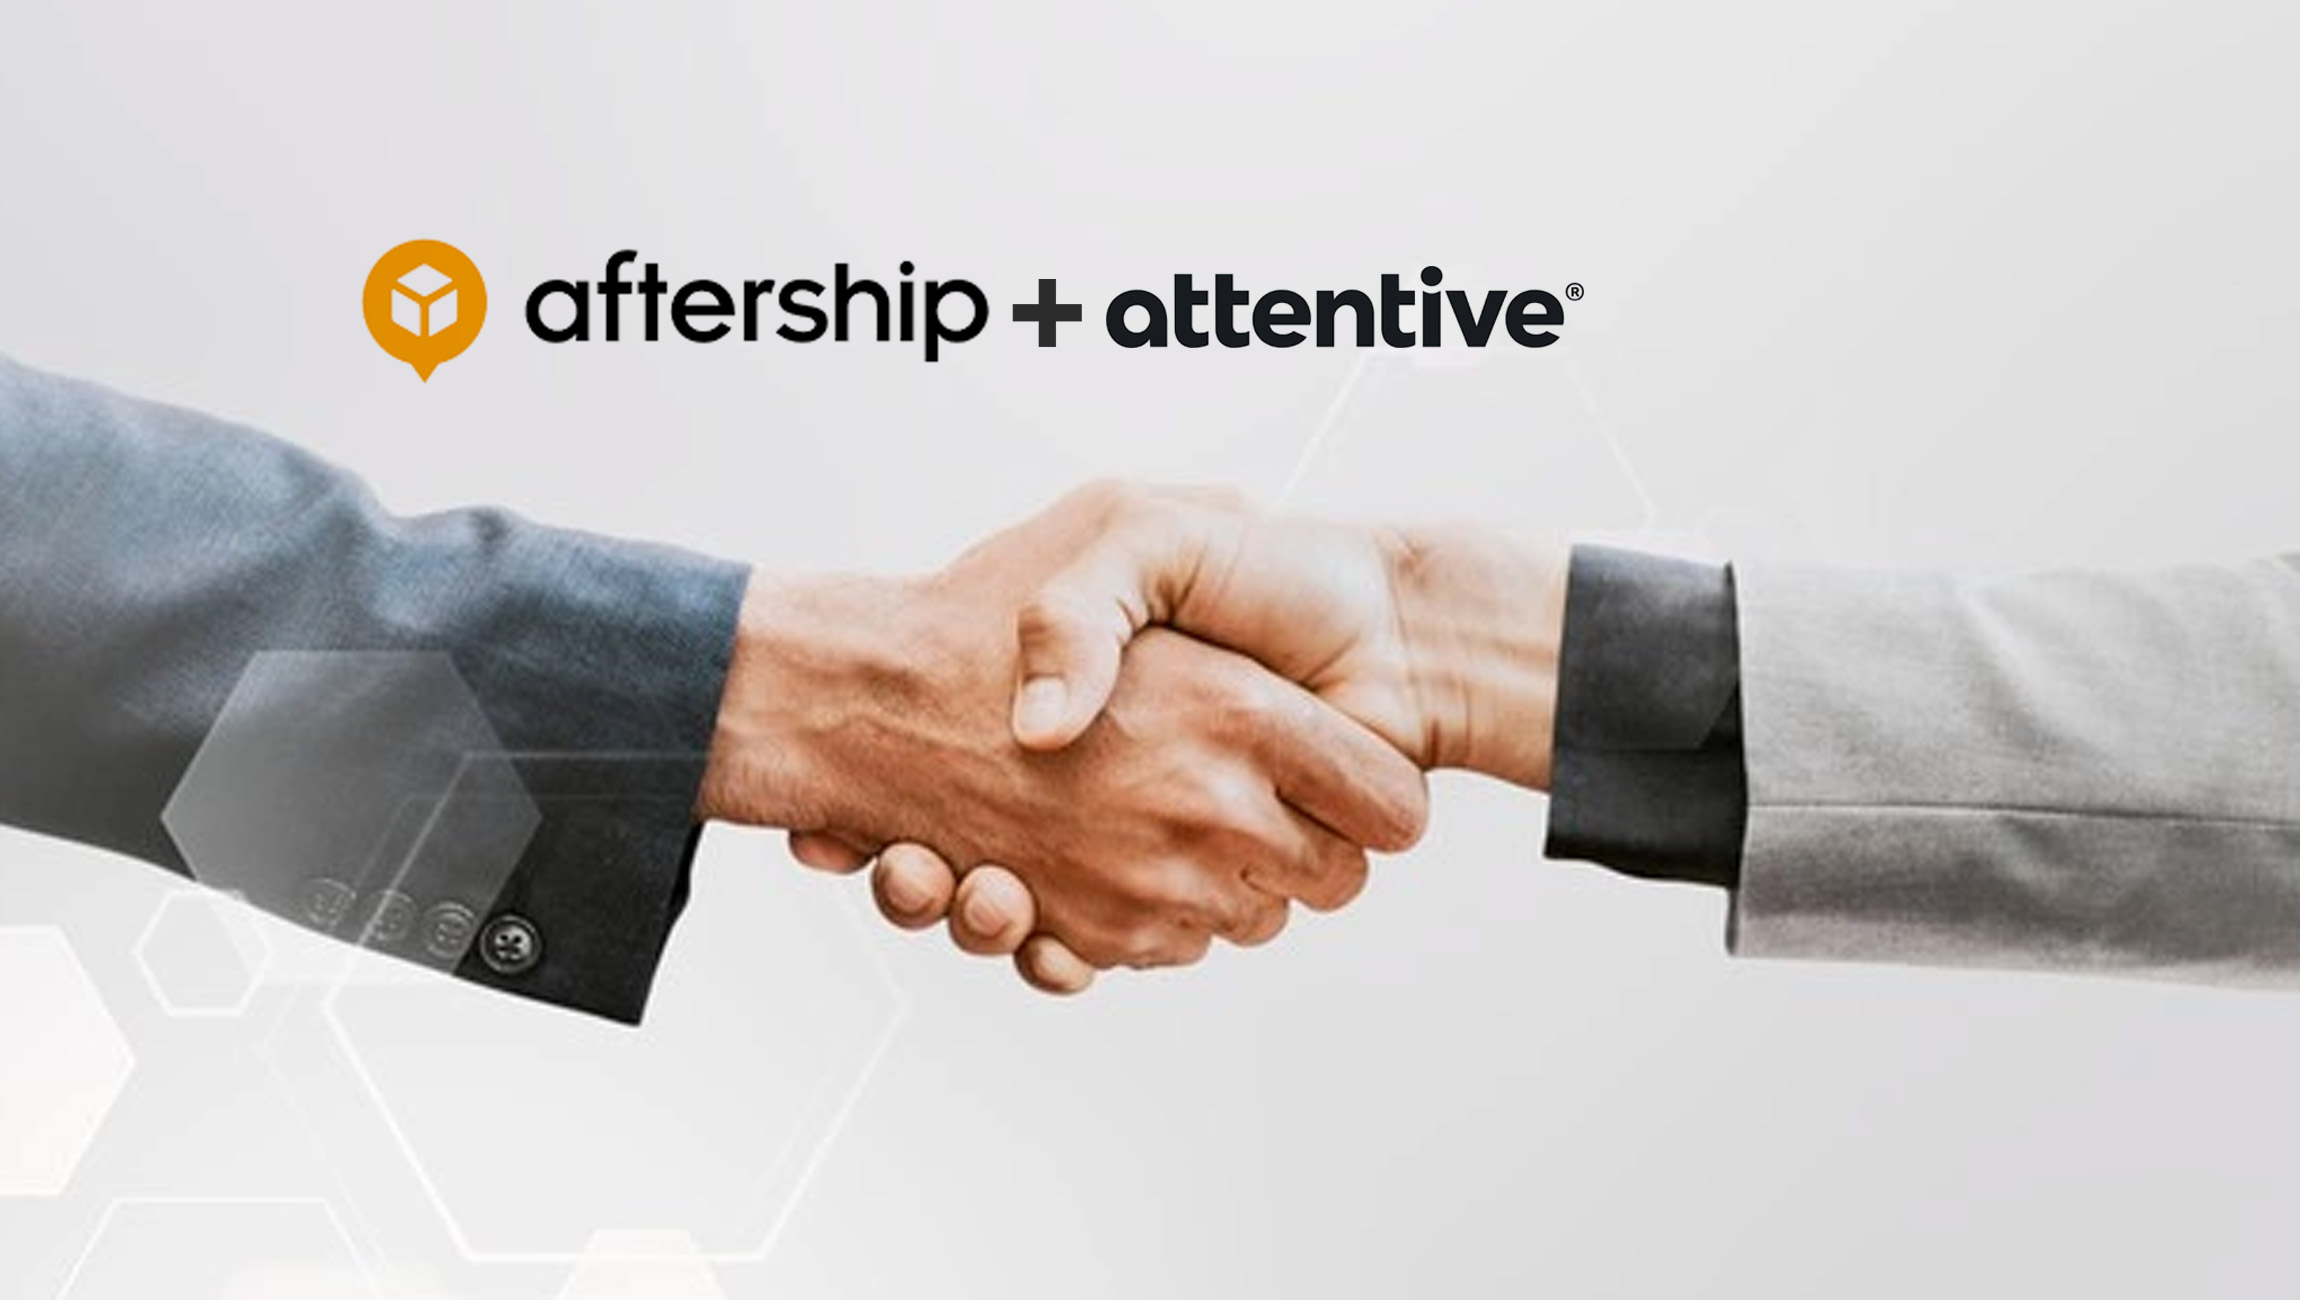 AfterShip and Attentive Announce Technology Partnership to Help Online Merchants Personalize the Post-Purchase Experience